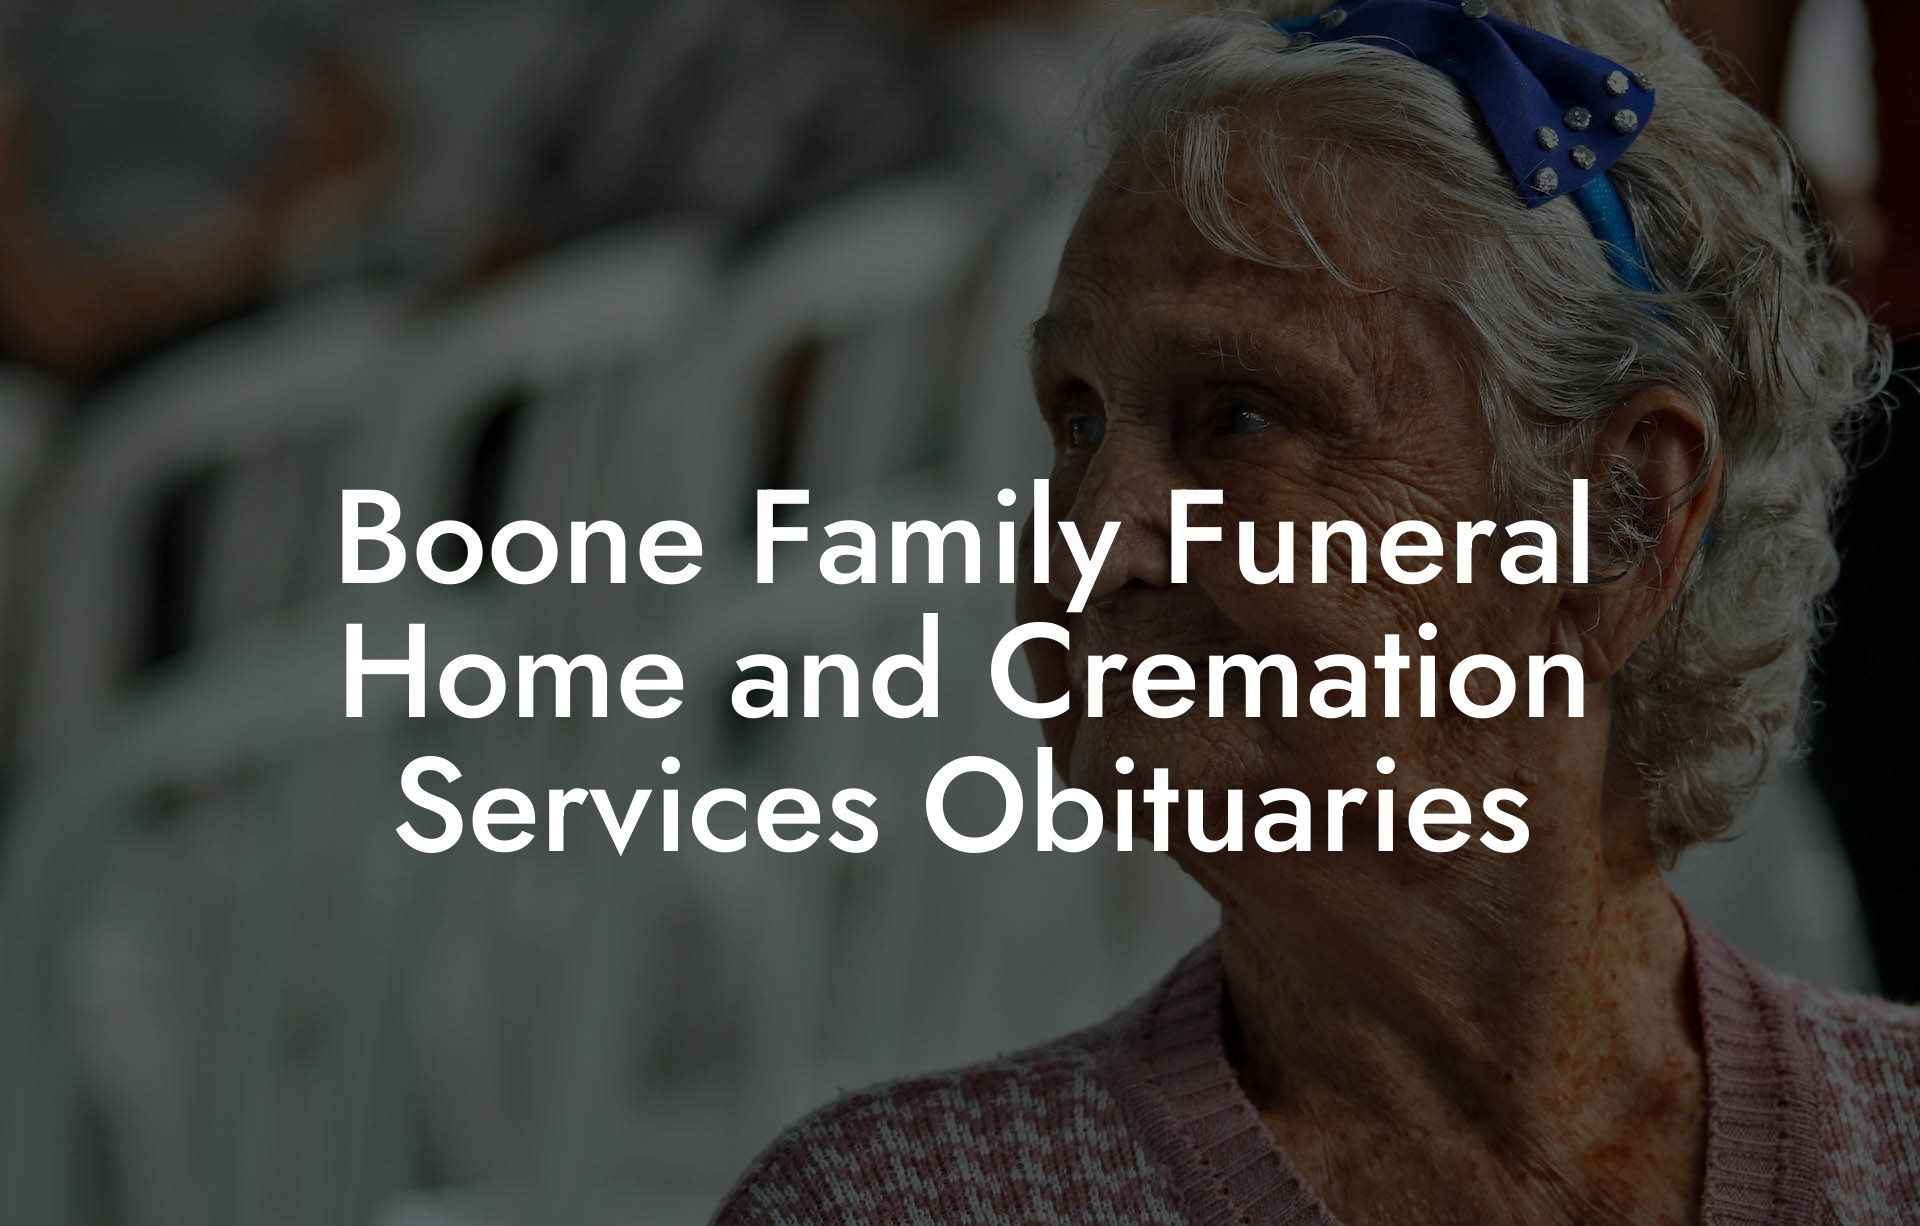 Boone Family Funeral Home and Cremation Services Obituaries